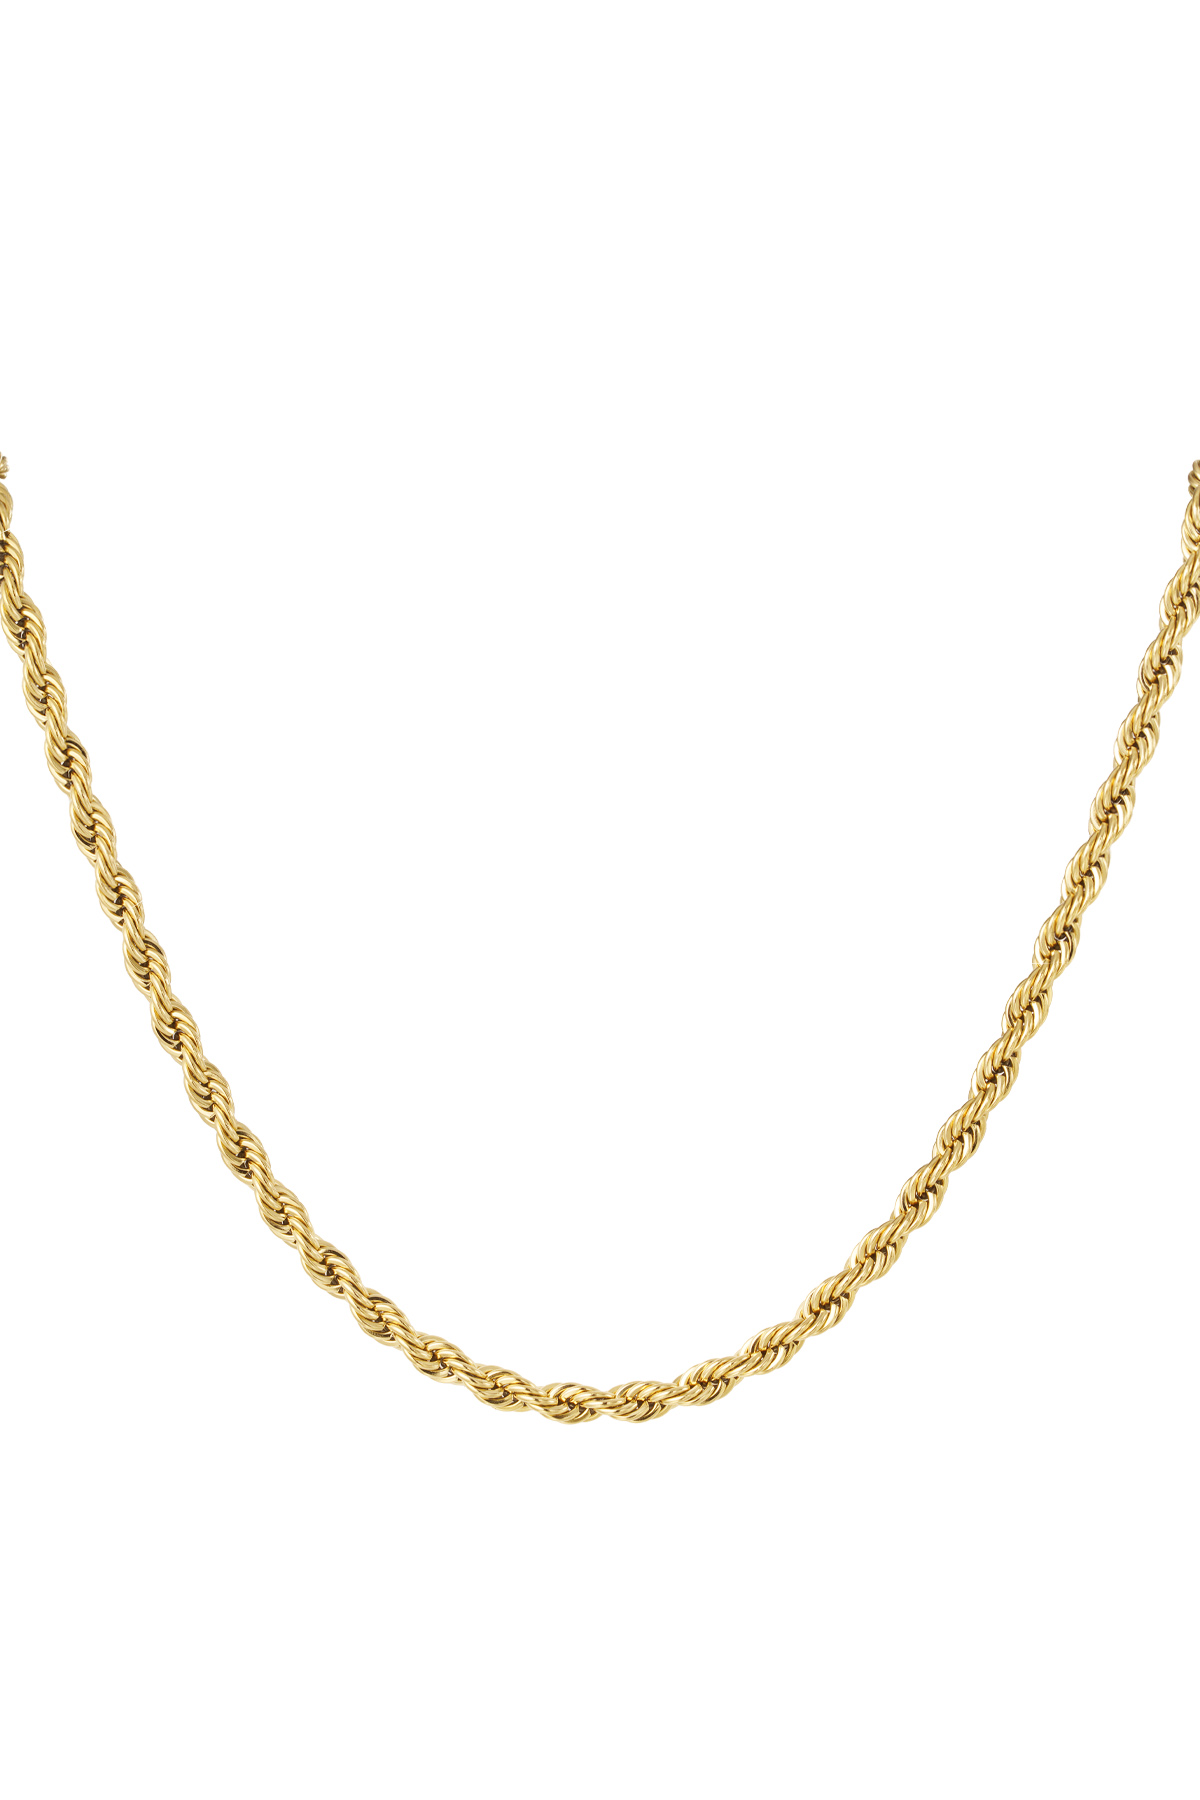 Unisex necklace thick twisted 60cm - gold-4.5MM h5 